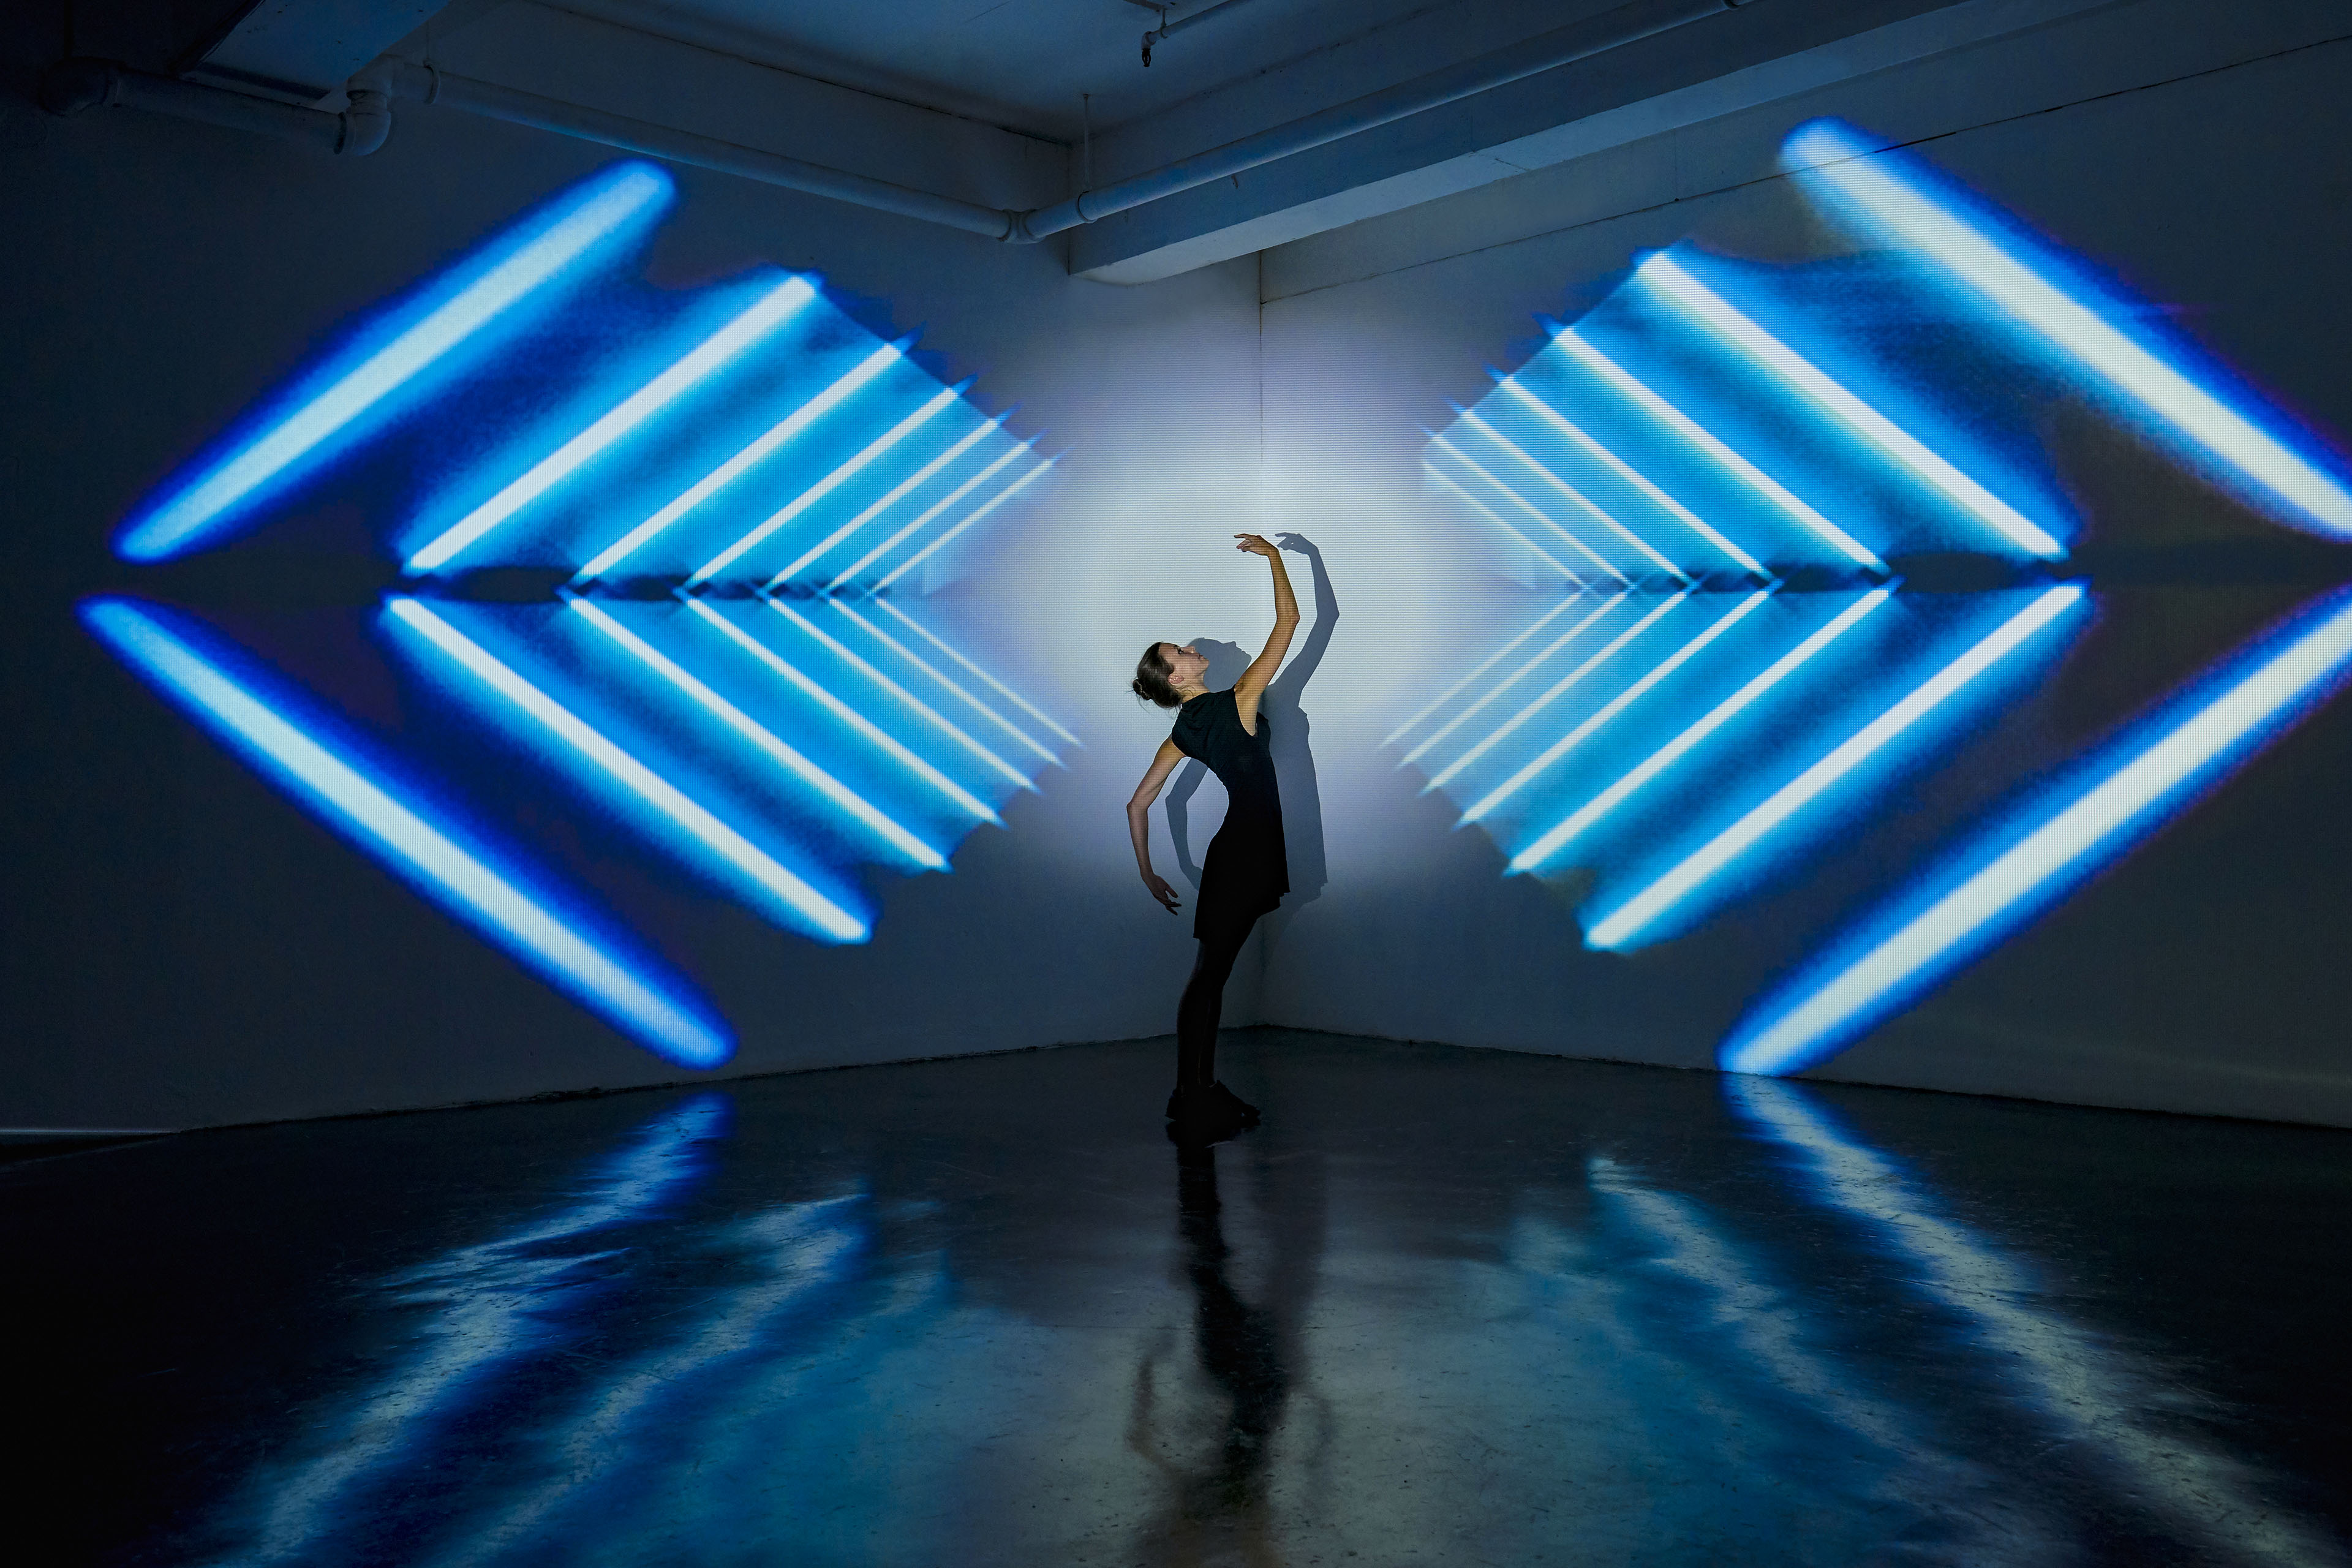 Girl dancing in a studio with graphic patterns projected onto wall behind her